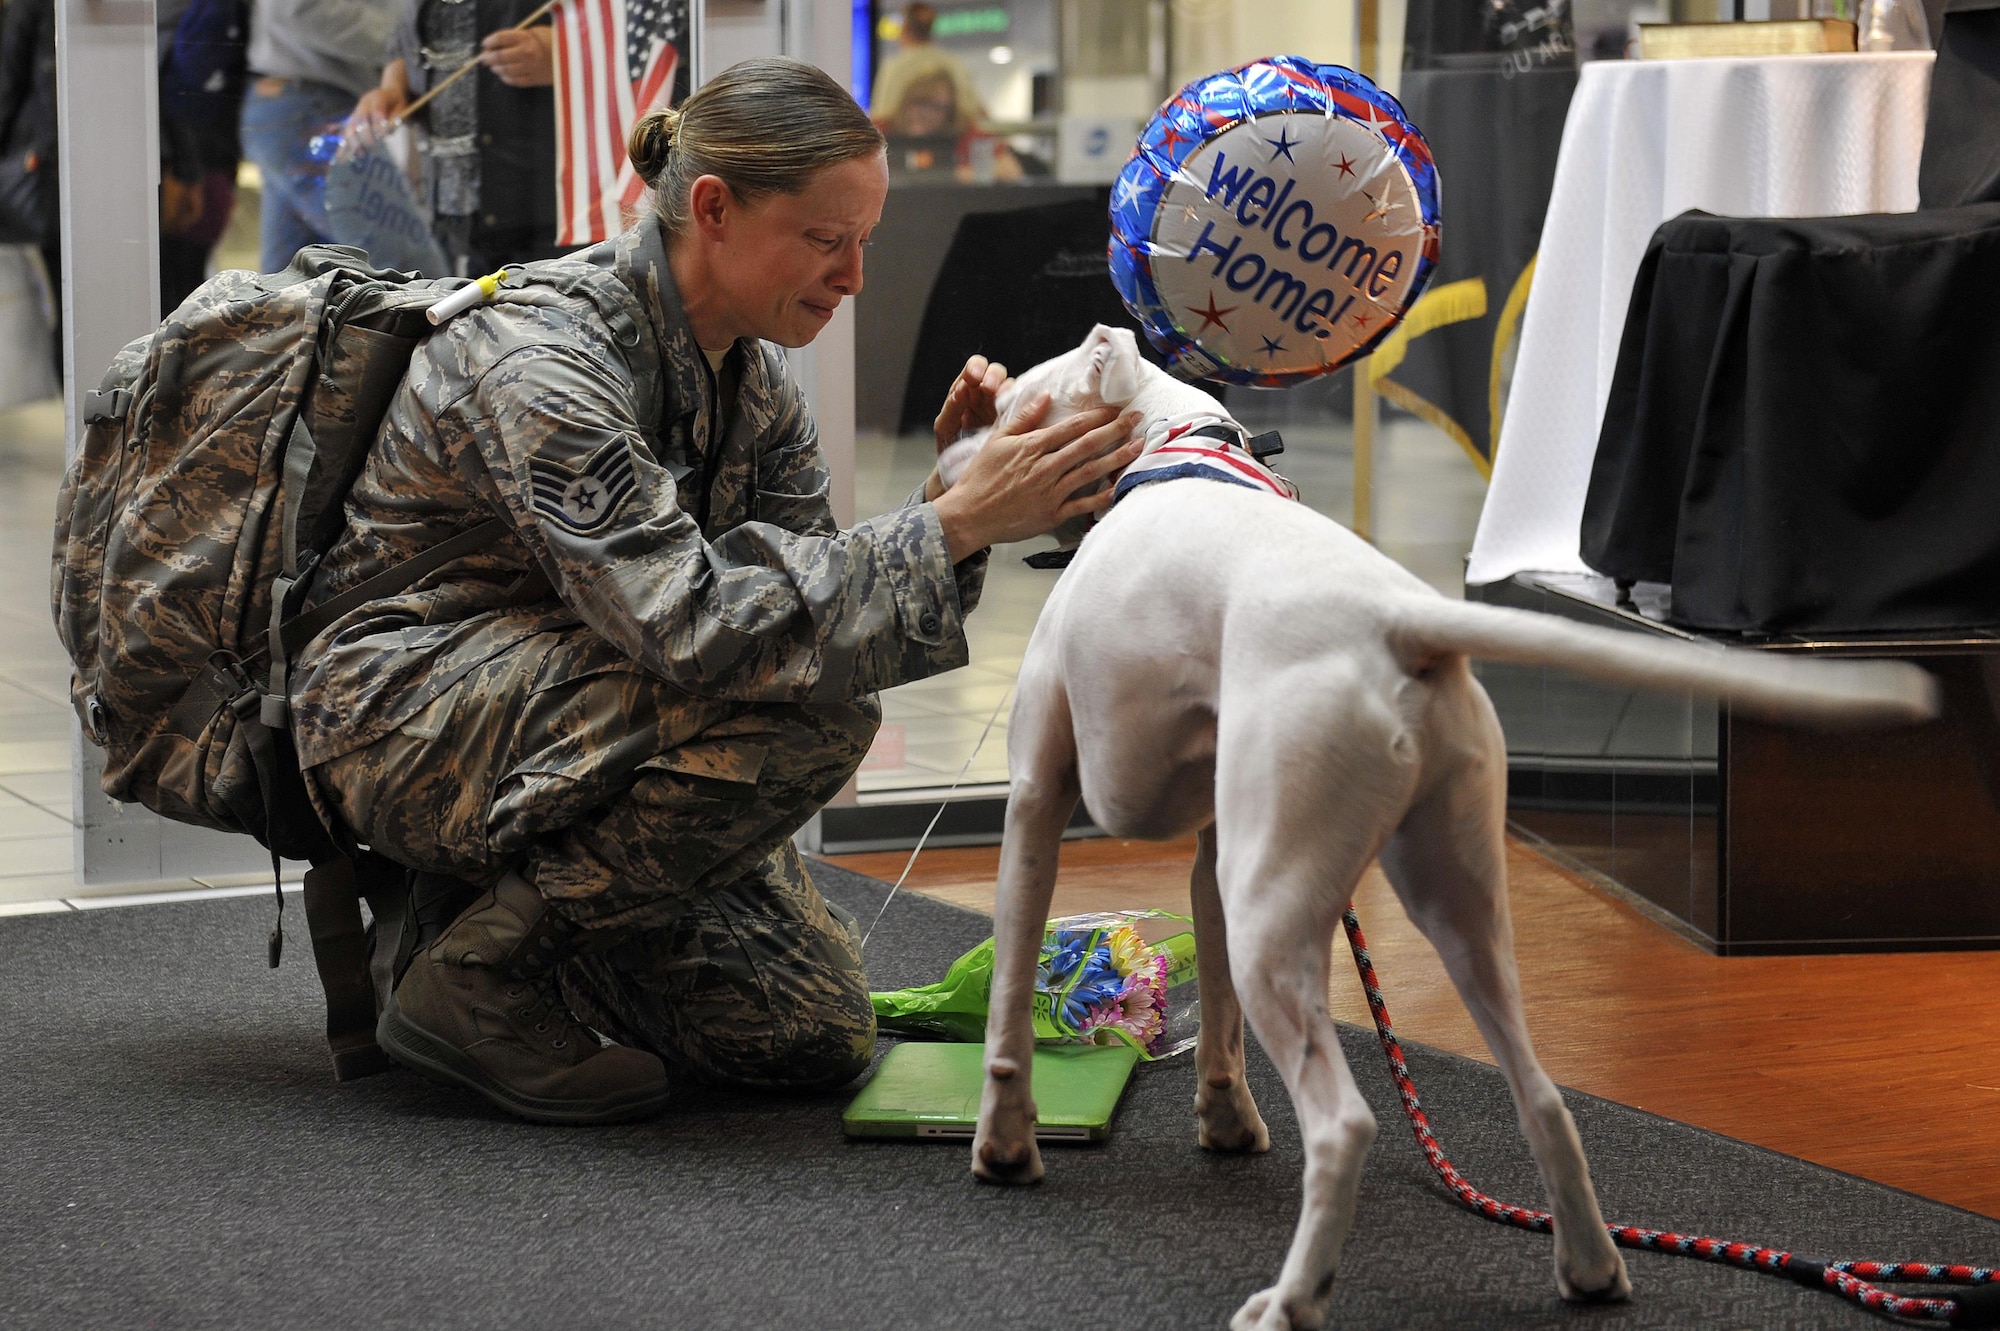 Staff Sgt. Arin Vickers, assigned to the 435th Supply Chain Operations Squadron, is greeted by her dog when she arrives at an airport USO in St. Louis on May 6, 2015. Vickers was gone for six months, and her friends and family were there to greet and surprise her by bringing along Baxter. (U.S. Air Force photo/Airman 1st Class Erica Crossen)